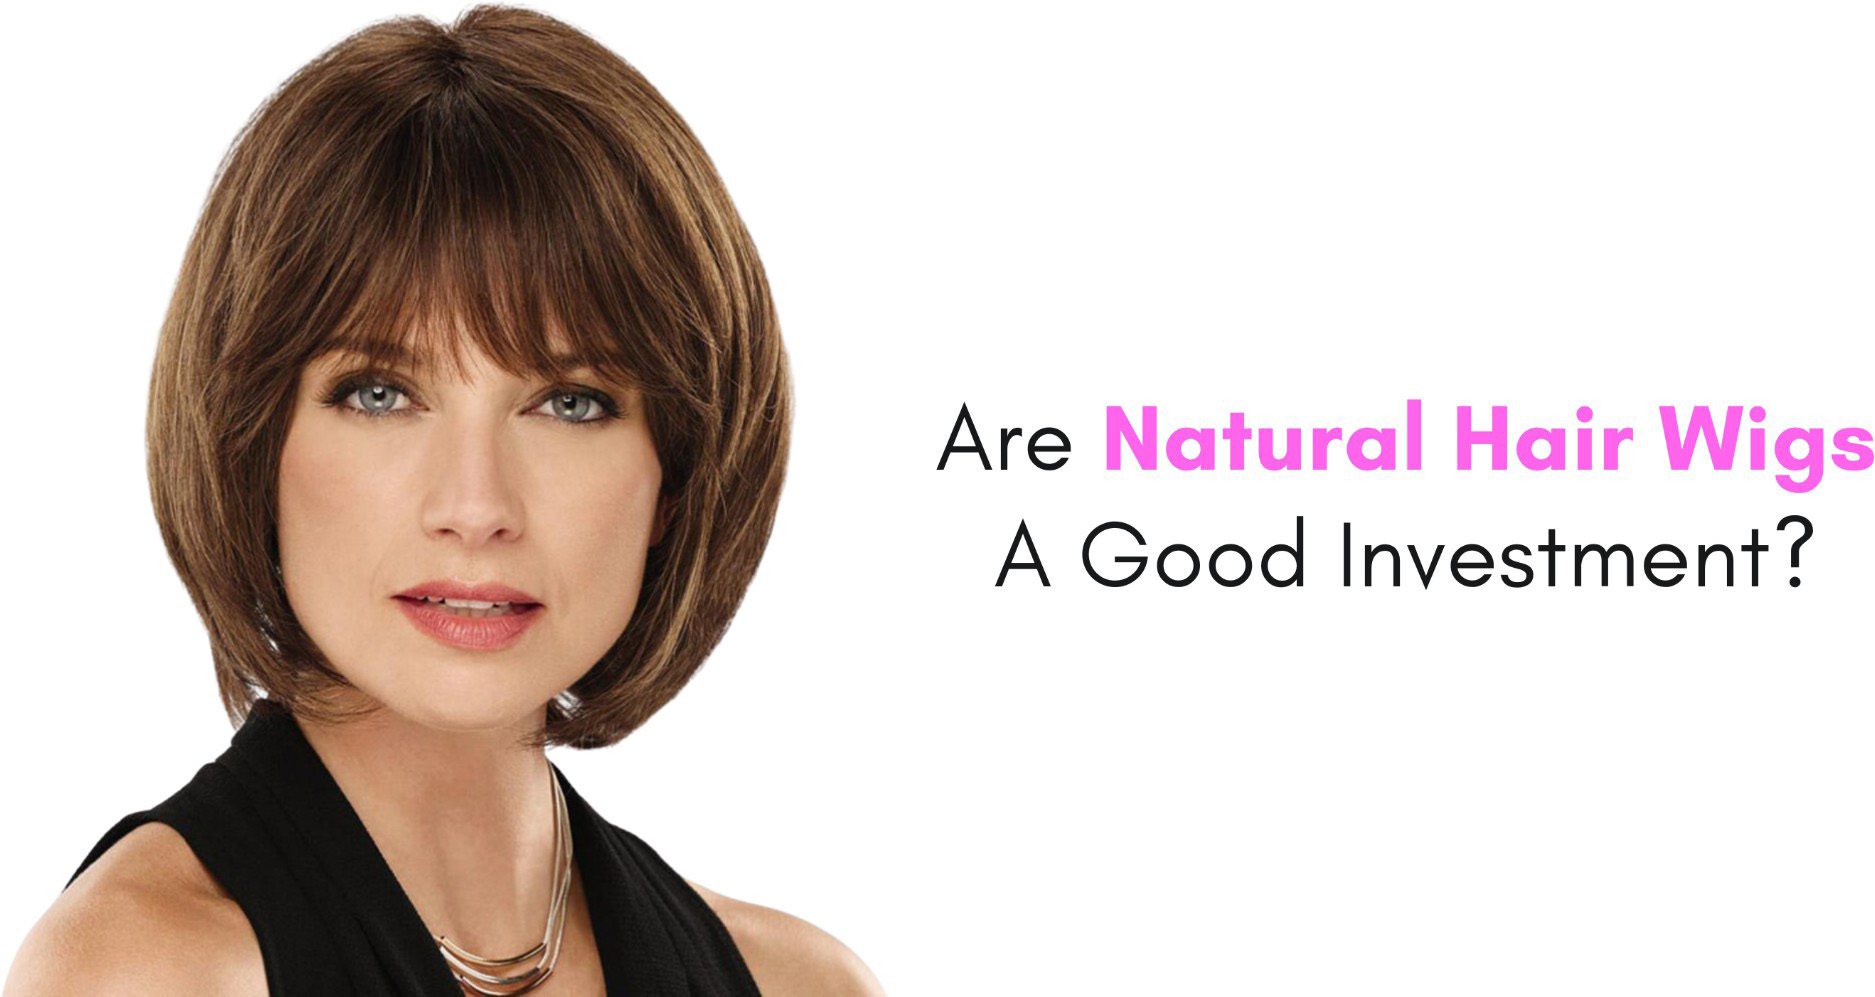 Are Natural Hair Wigs A Good Investment?